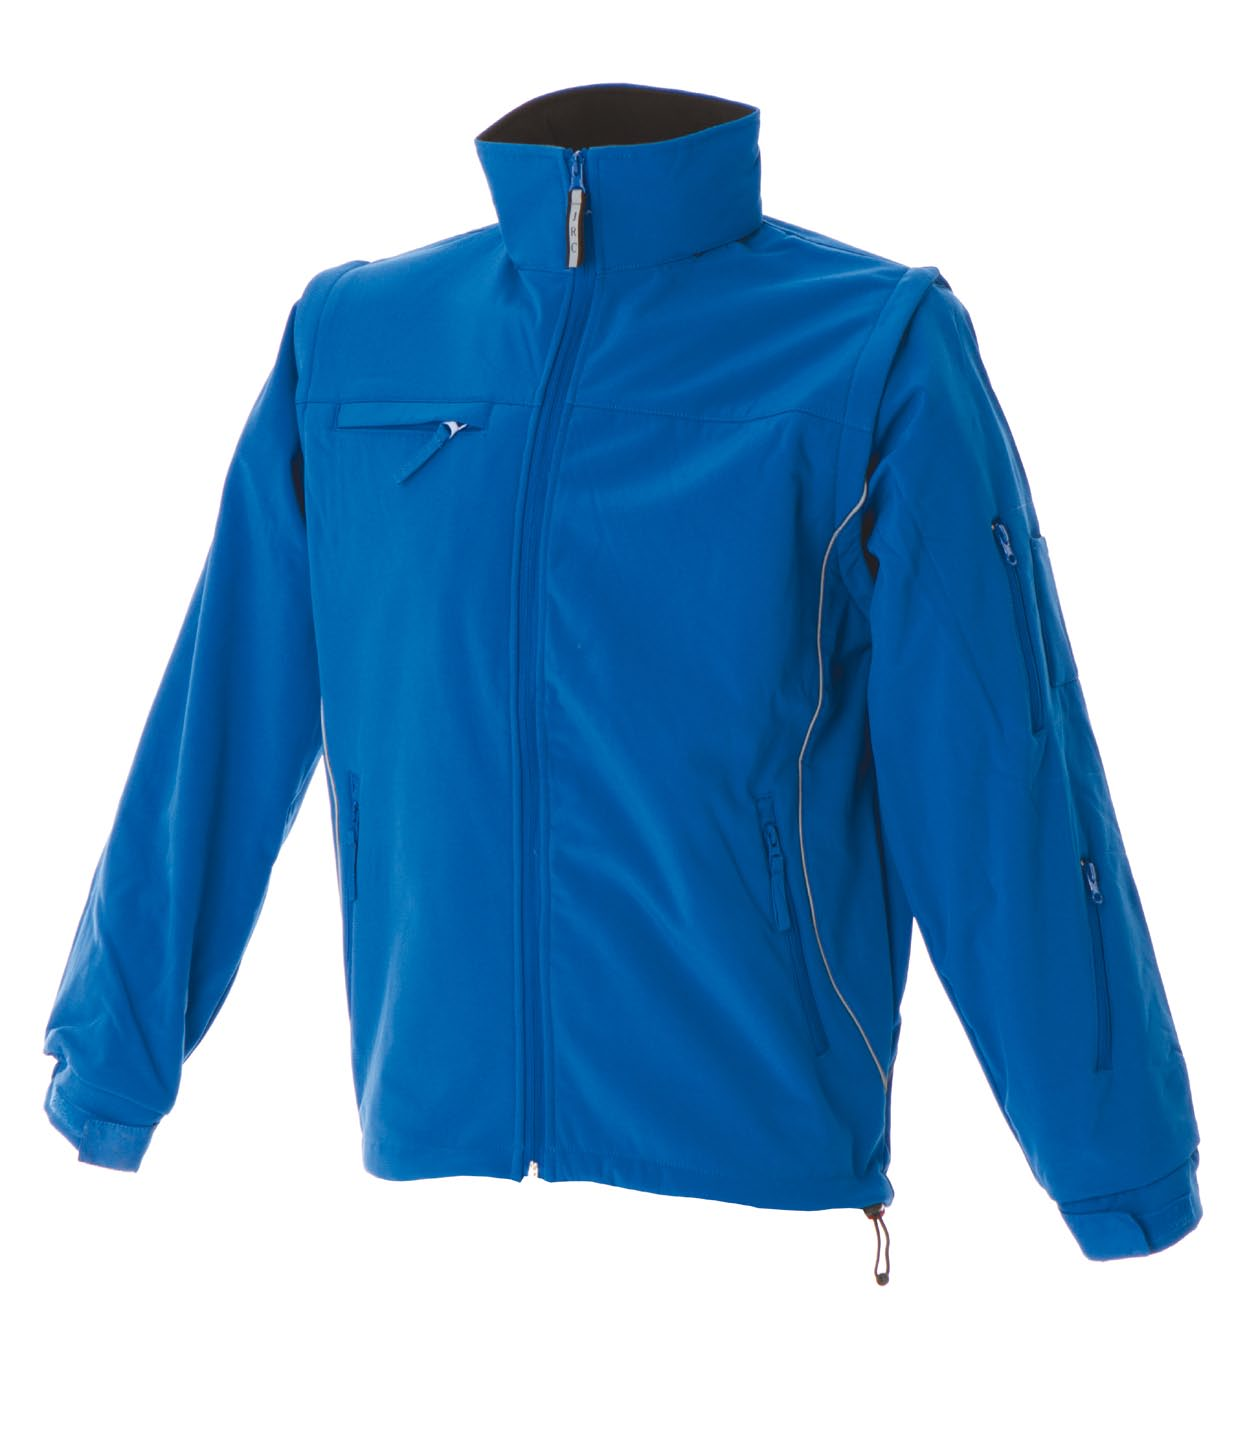 Jacket in soft shell with detachable sleeves 92% polyester - 8% elastan Giubbino in soft shell 92% polyestere - 8% elastan Veste en soft shell 92% polyester - 8% elastan, manches